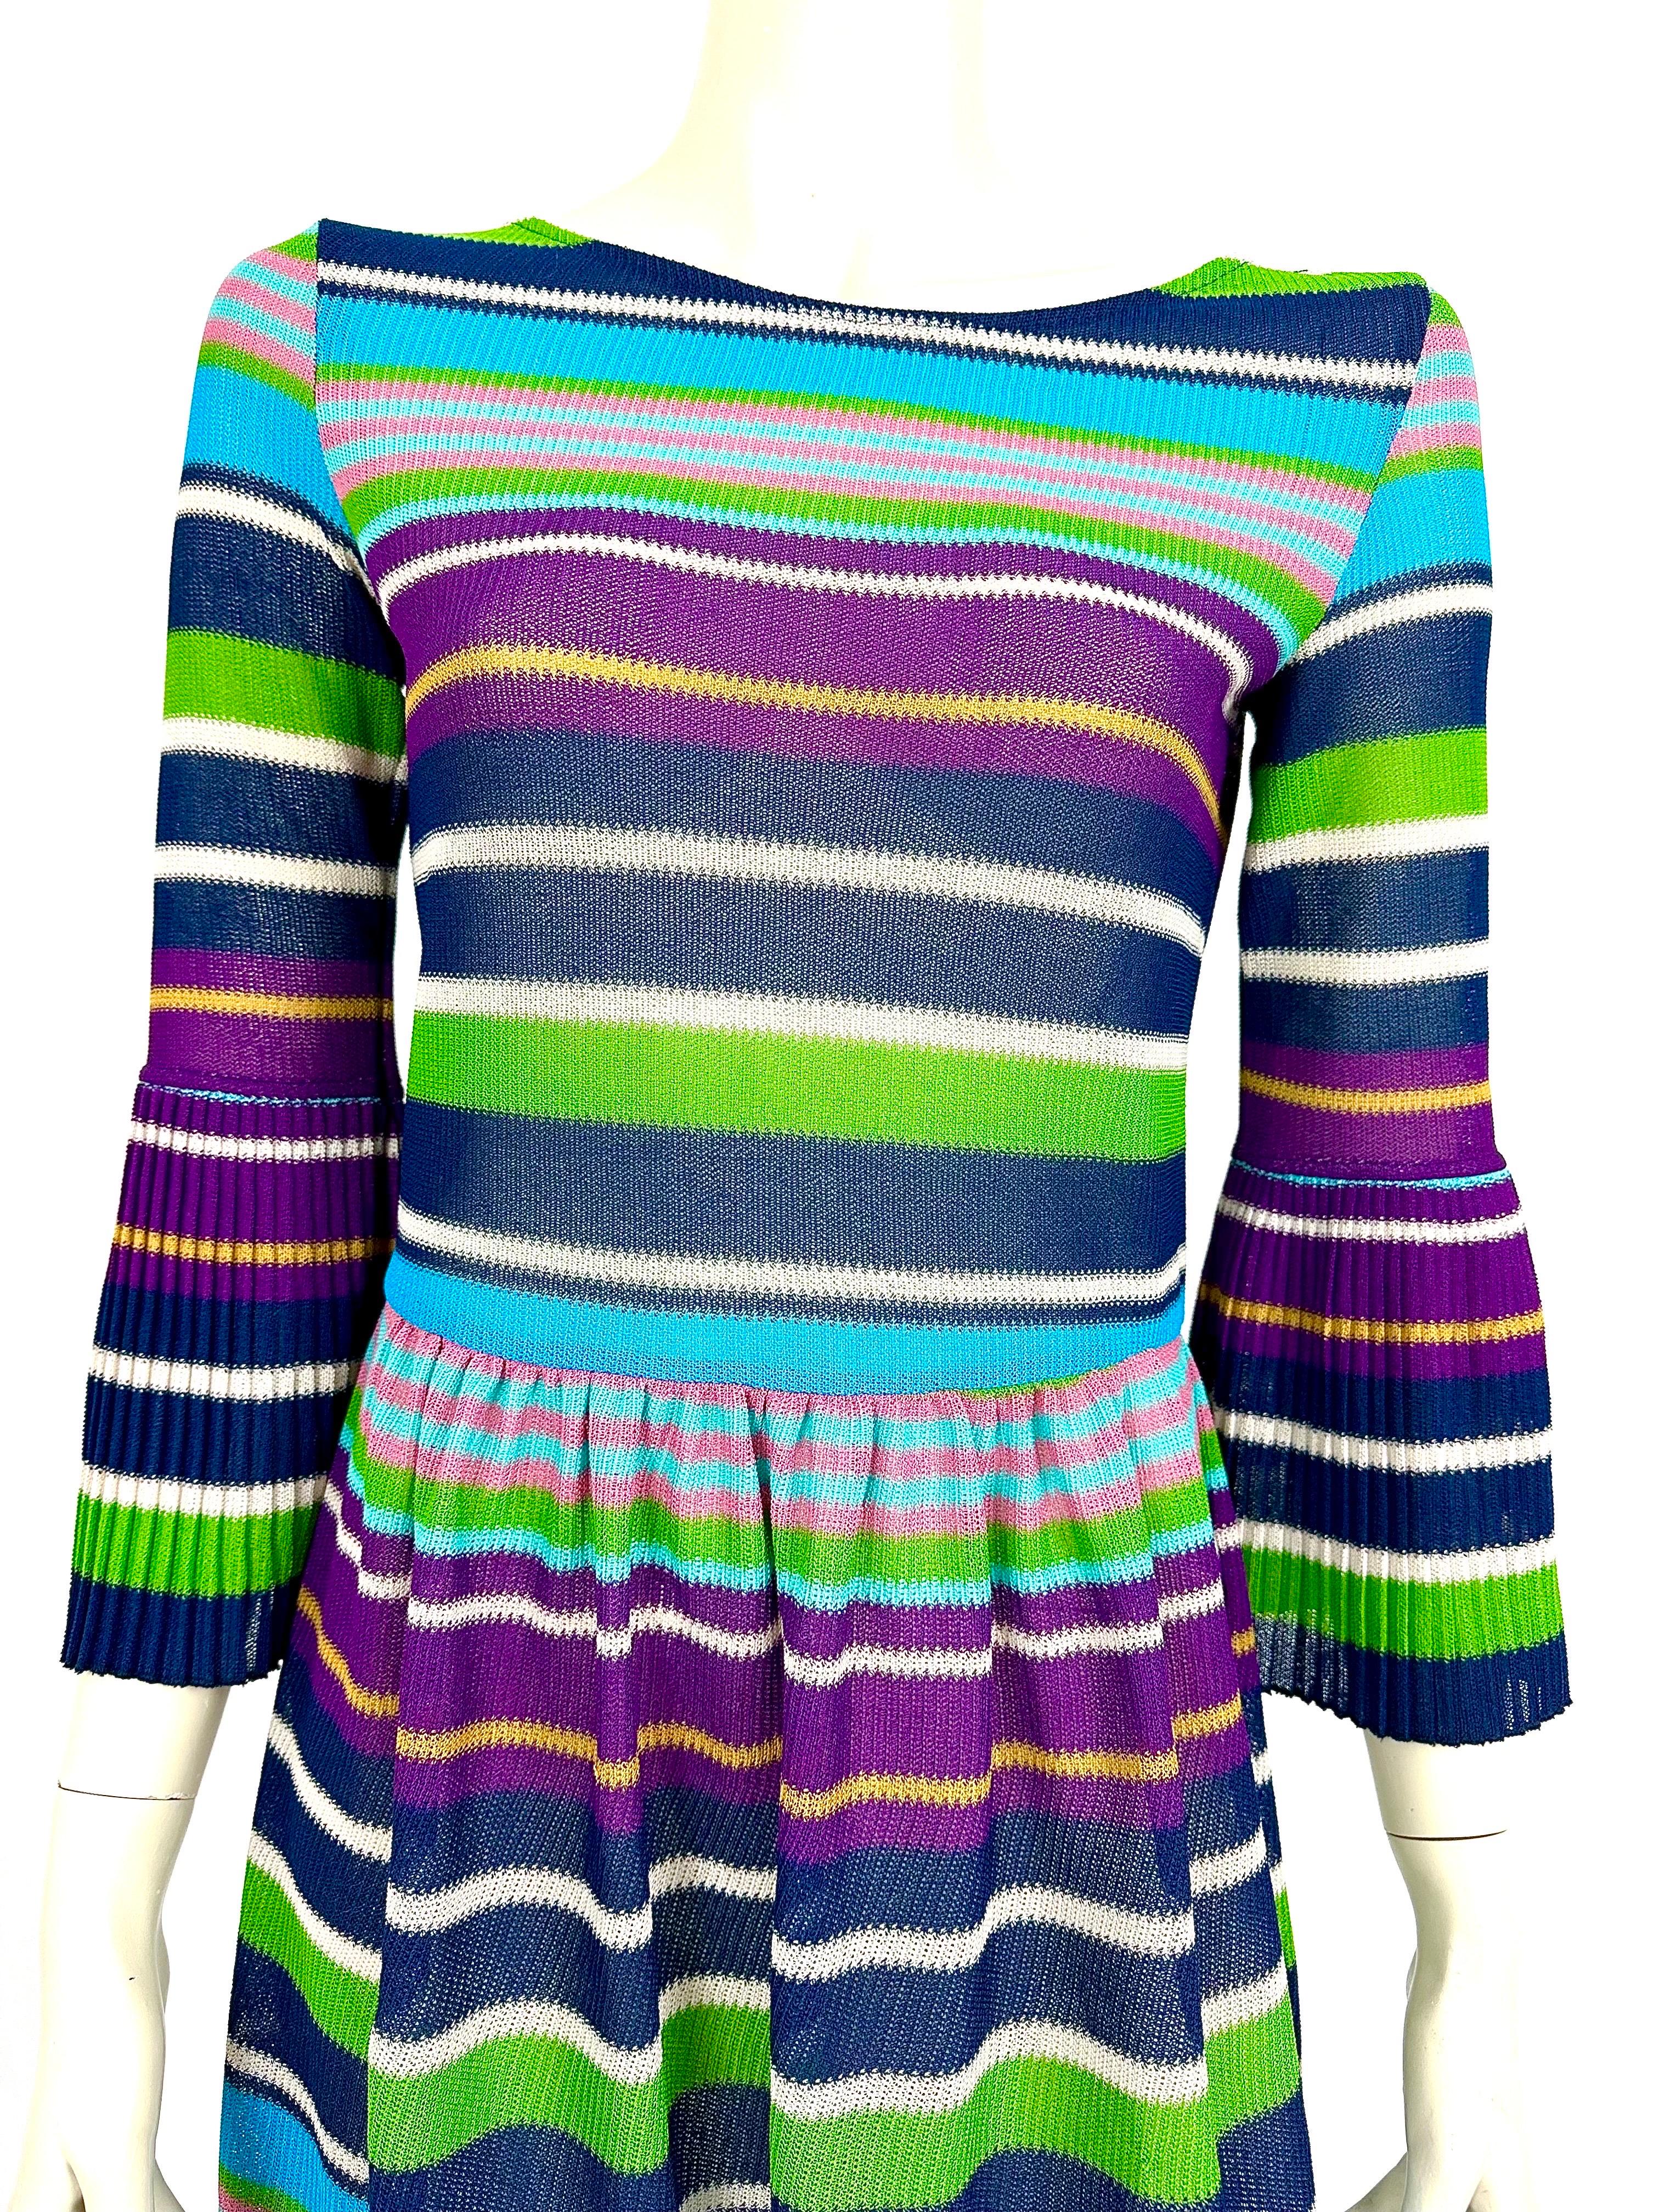 Vintage Missoni dress
knitwear from the 1980s.
Multicolored horizontal stripes.
Round collar, beautiful pleated sleeves on the forearm.
The skirt is also pleated at the waist.
The slightly transparent dress is not lined with fabric.

Composition and